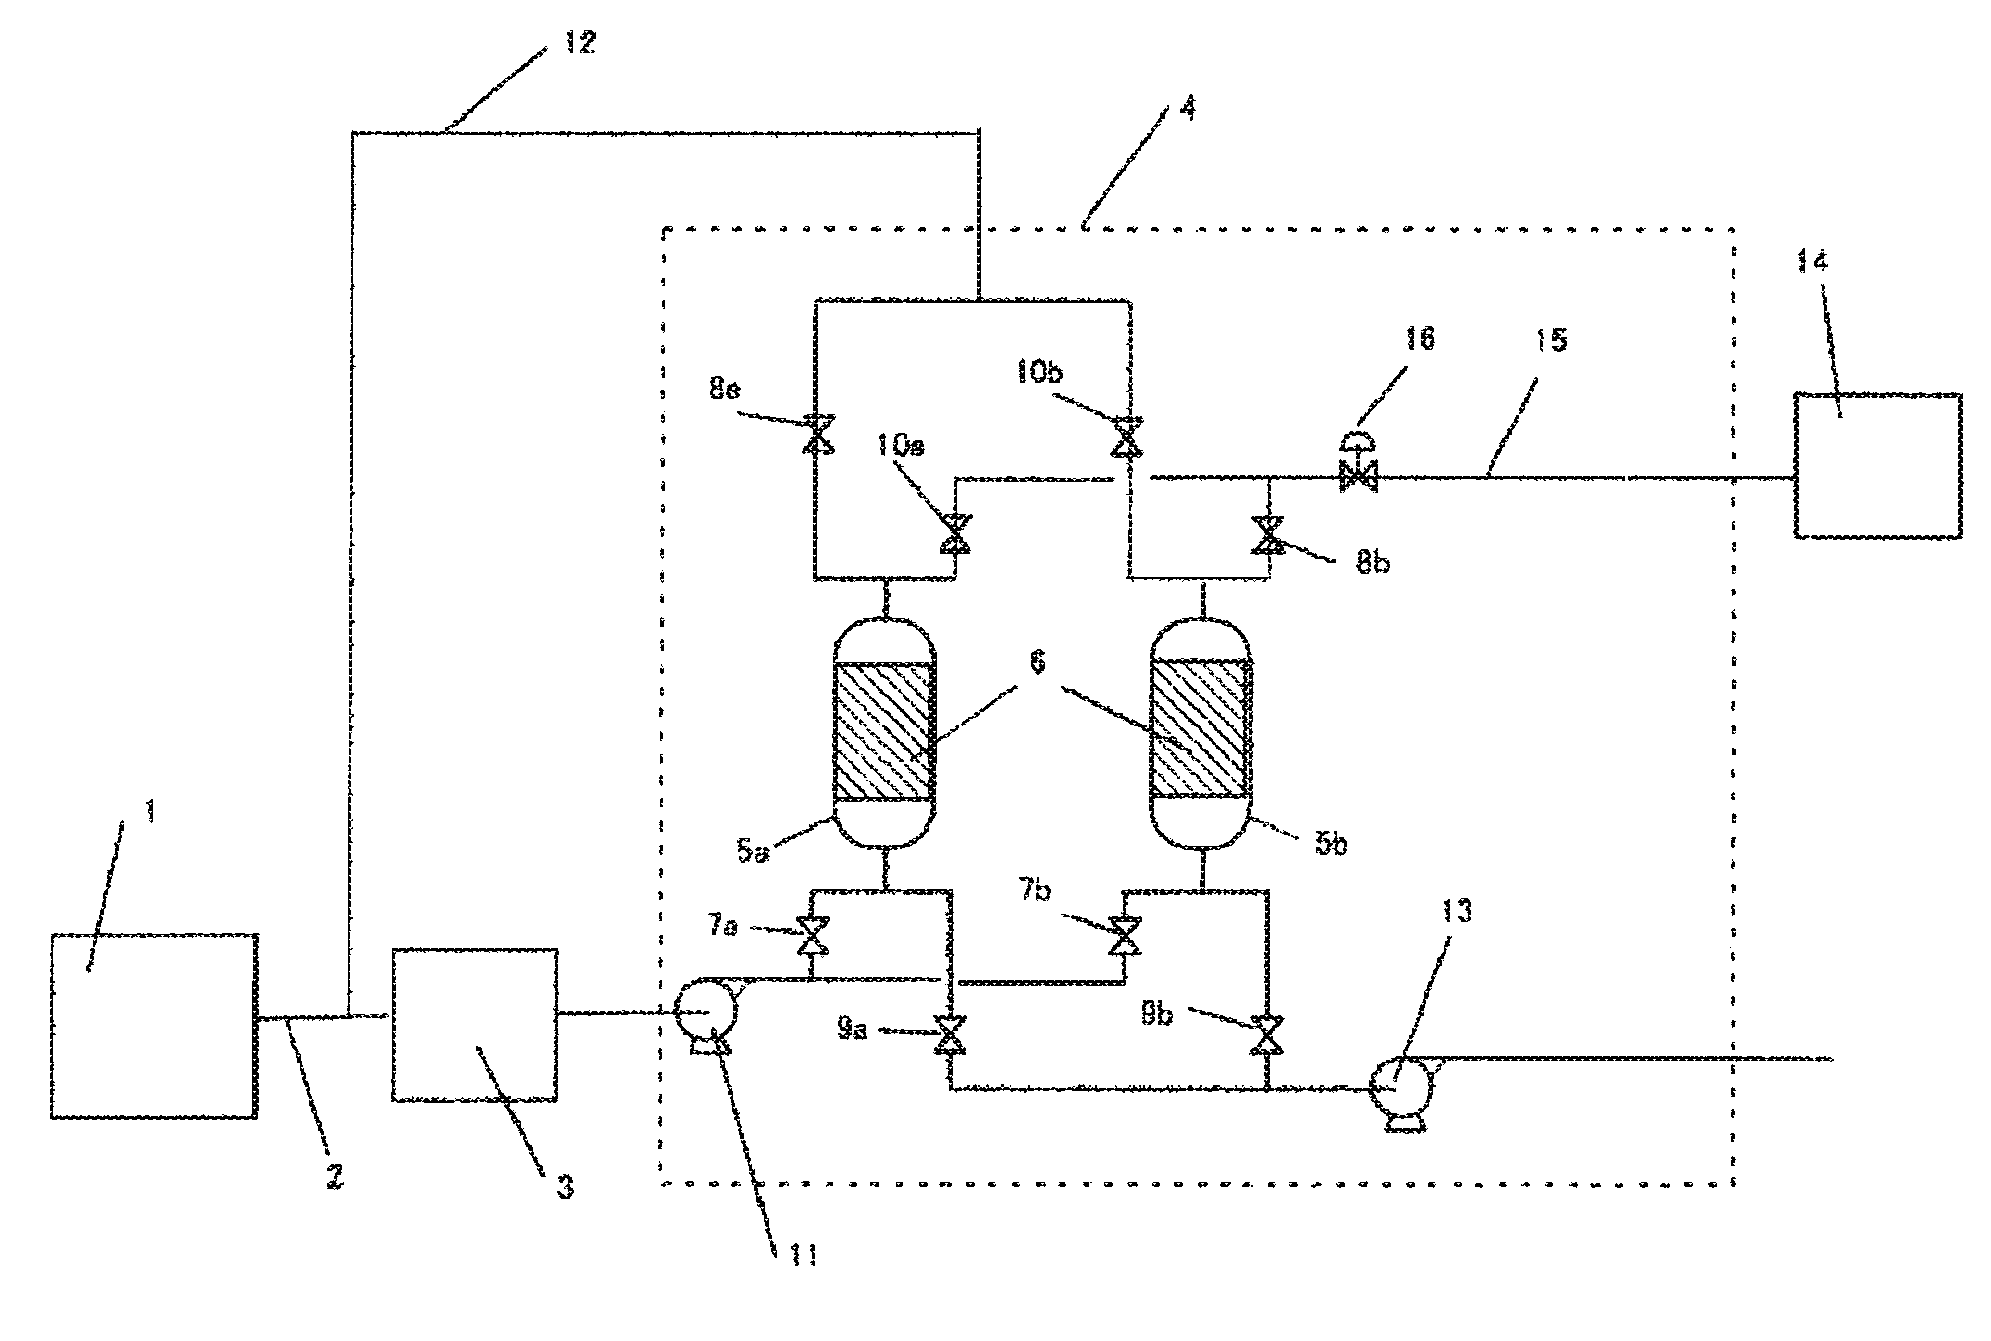 Method and apparatus for producing and storing ozone using adsorbent